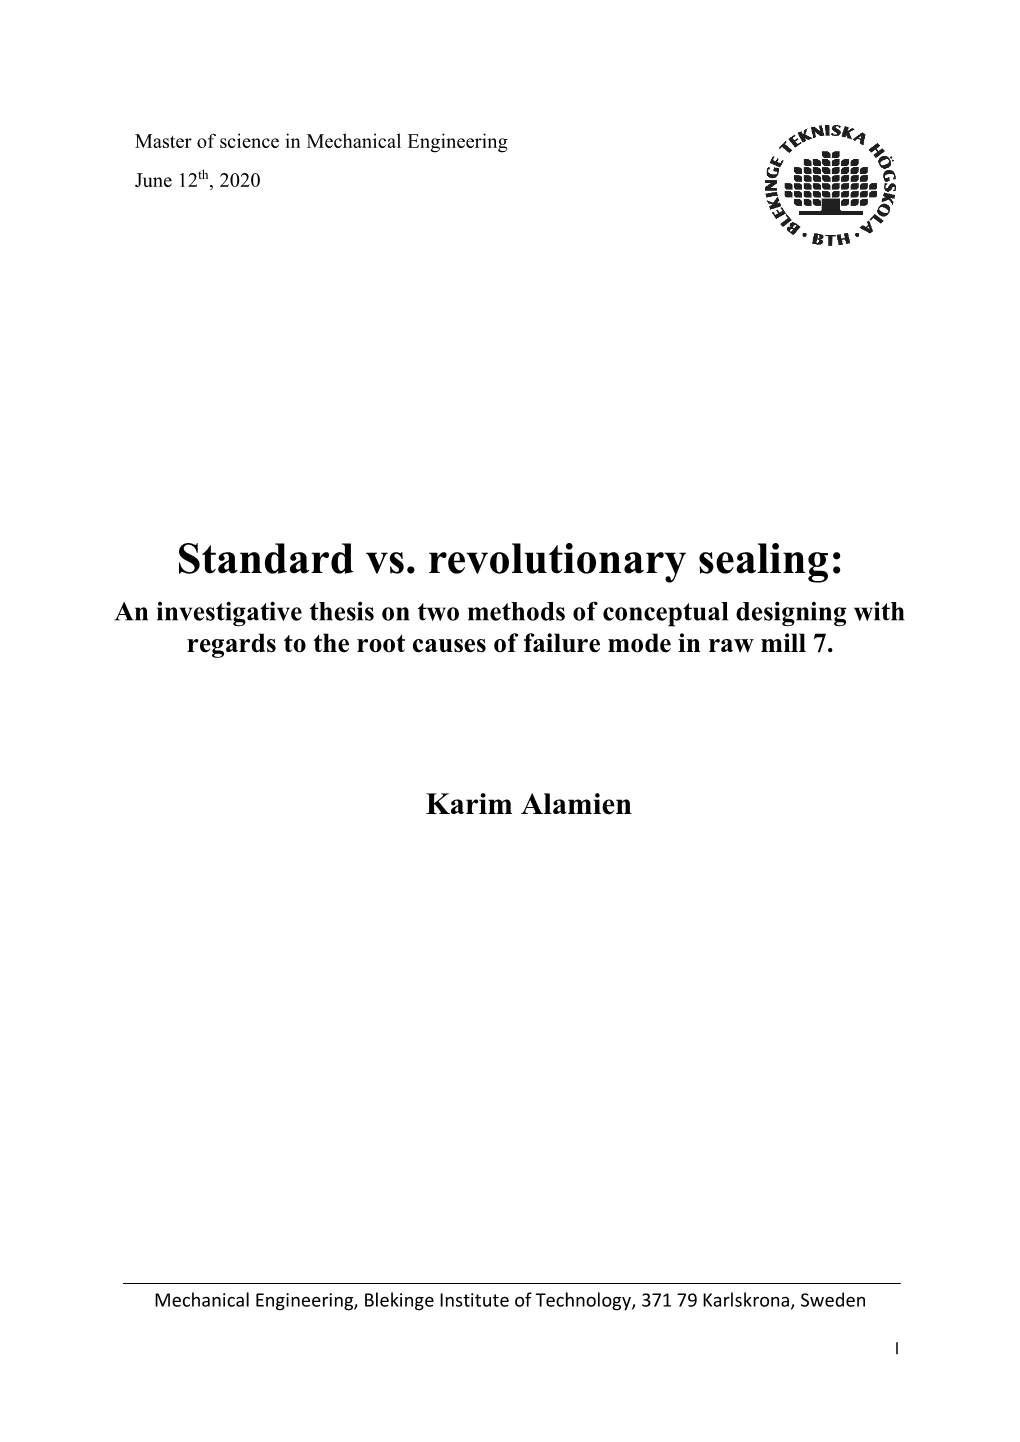 Standard Vs. Revolutionary Sealing: an Investigative Thesis on Two Methods of Conceptual Designing with Regards to the Root Causes of Failure Mode in Raw Mill 7